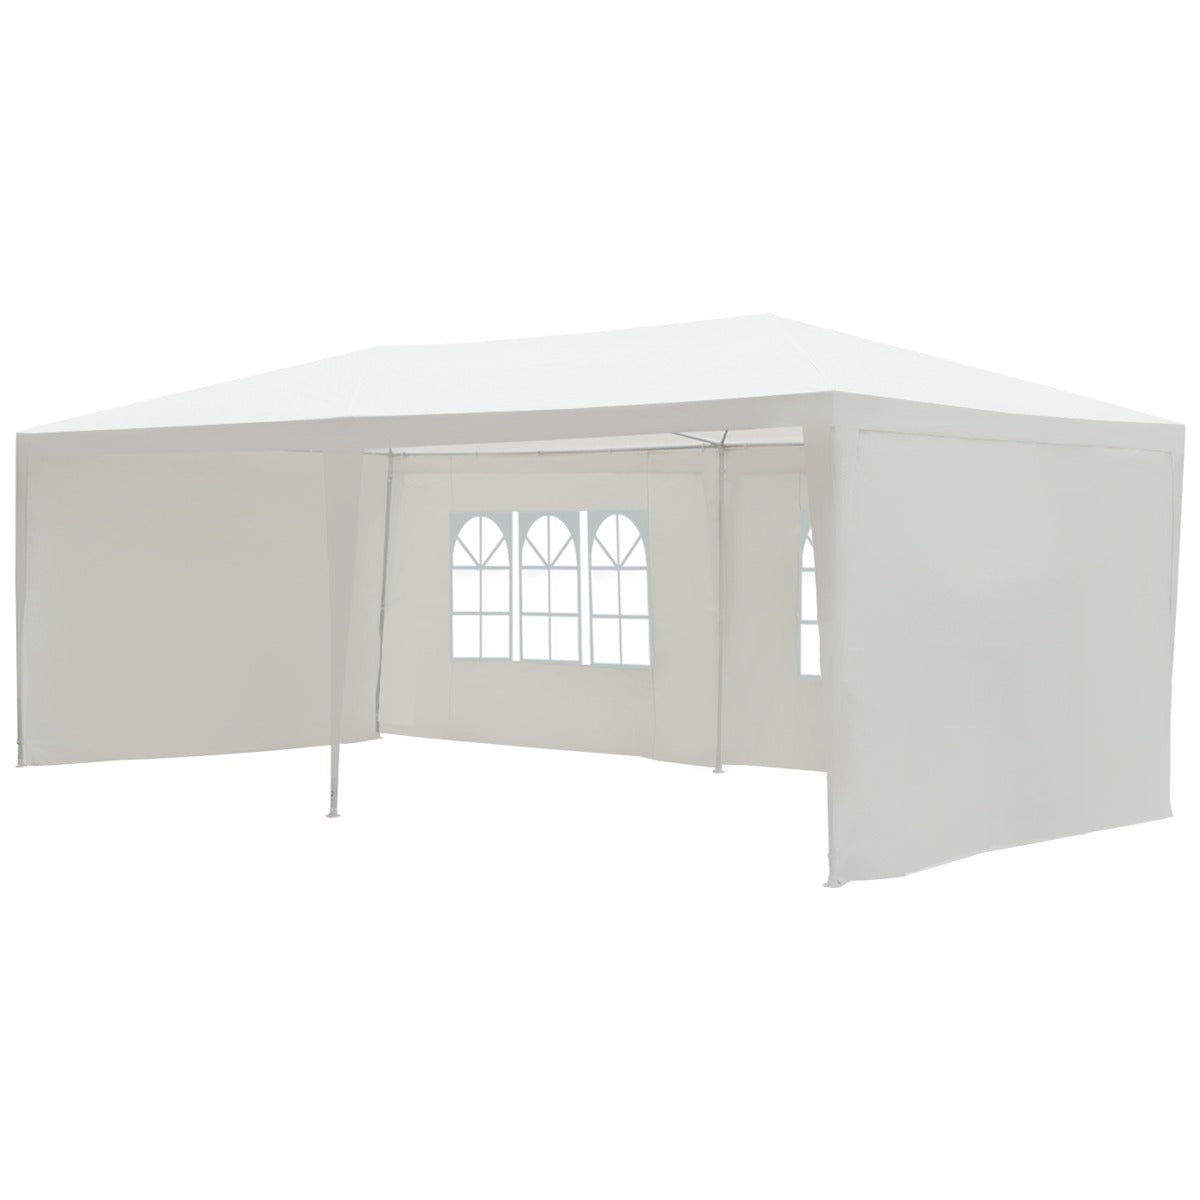 Outsunny Gazebo Canopy Camping/Party/Wedding Tent with PE Cloth 6x3 m-White